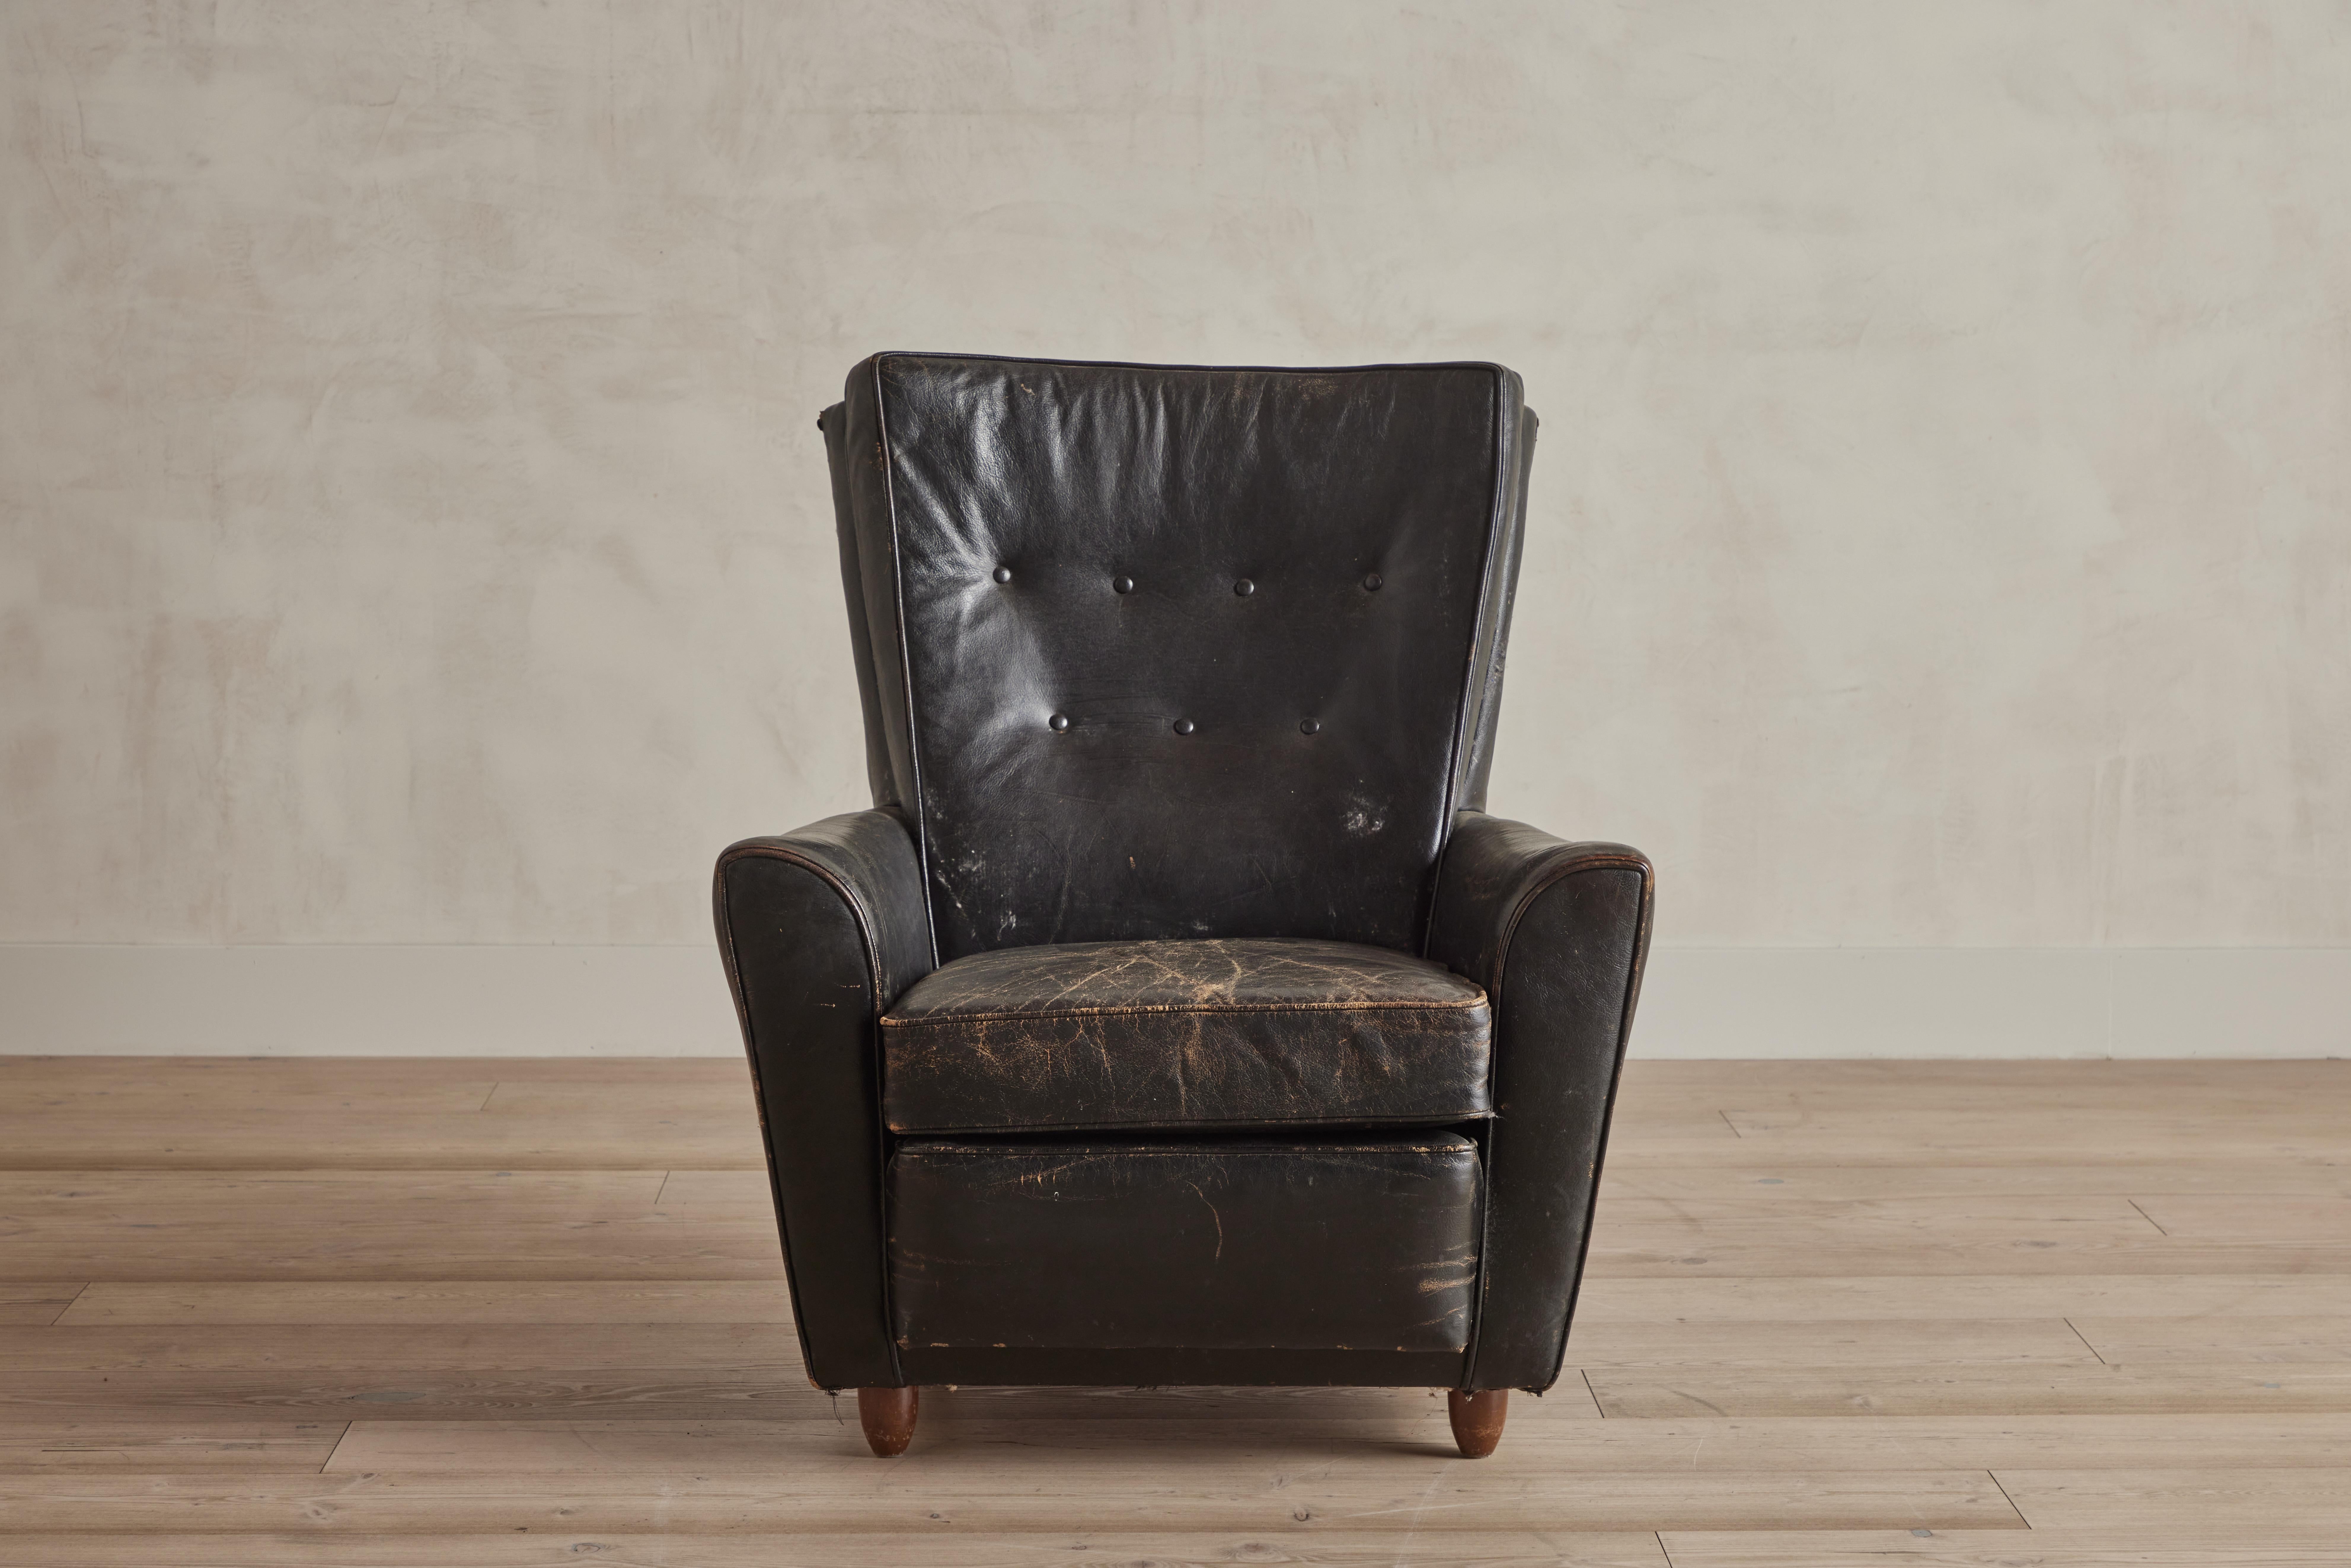 Midcentury black leather high back armchair. Heavy wear on leather that is consistent with age and use. Denmark 1960.